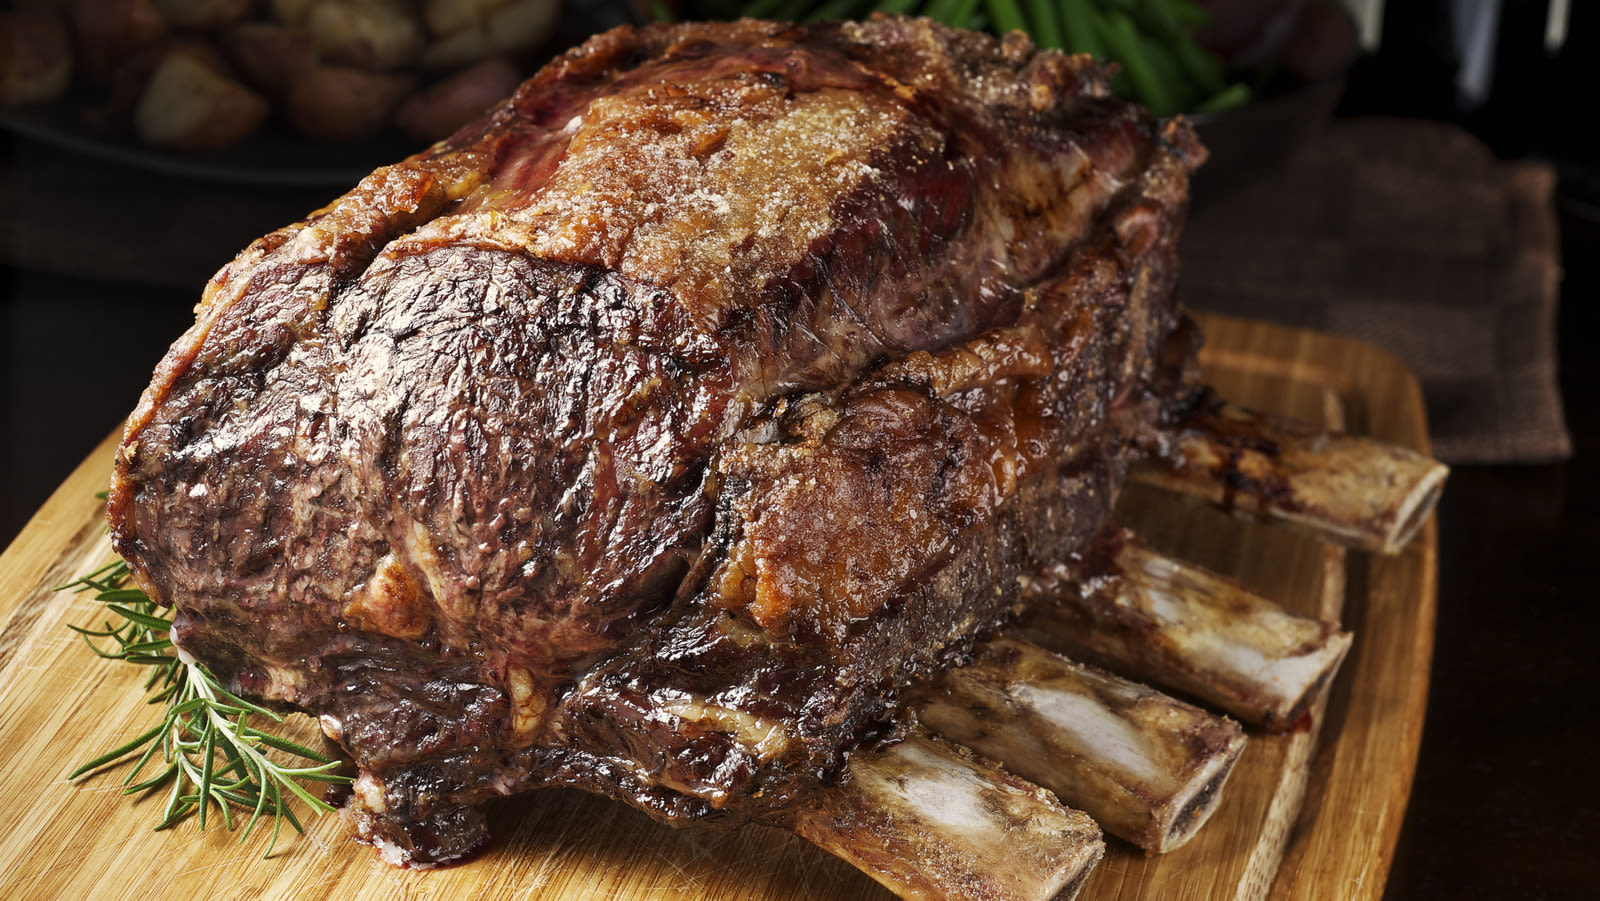 Award-Winning Chef Jean-Pierre's 13 Mistakes To Avoid When Cooking Prime Rib